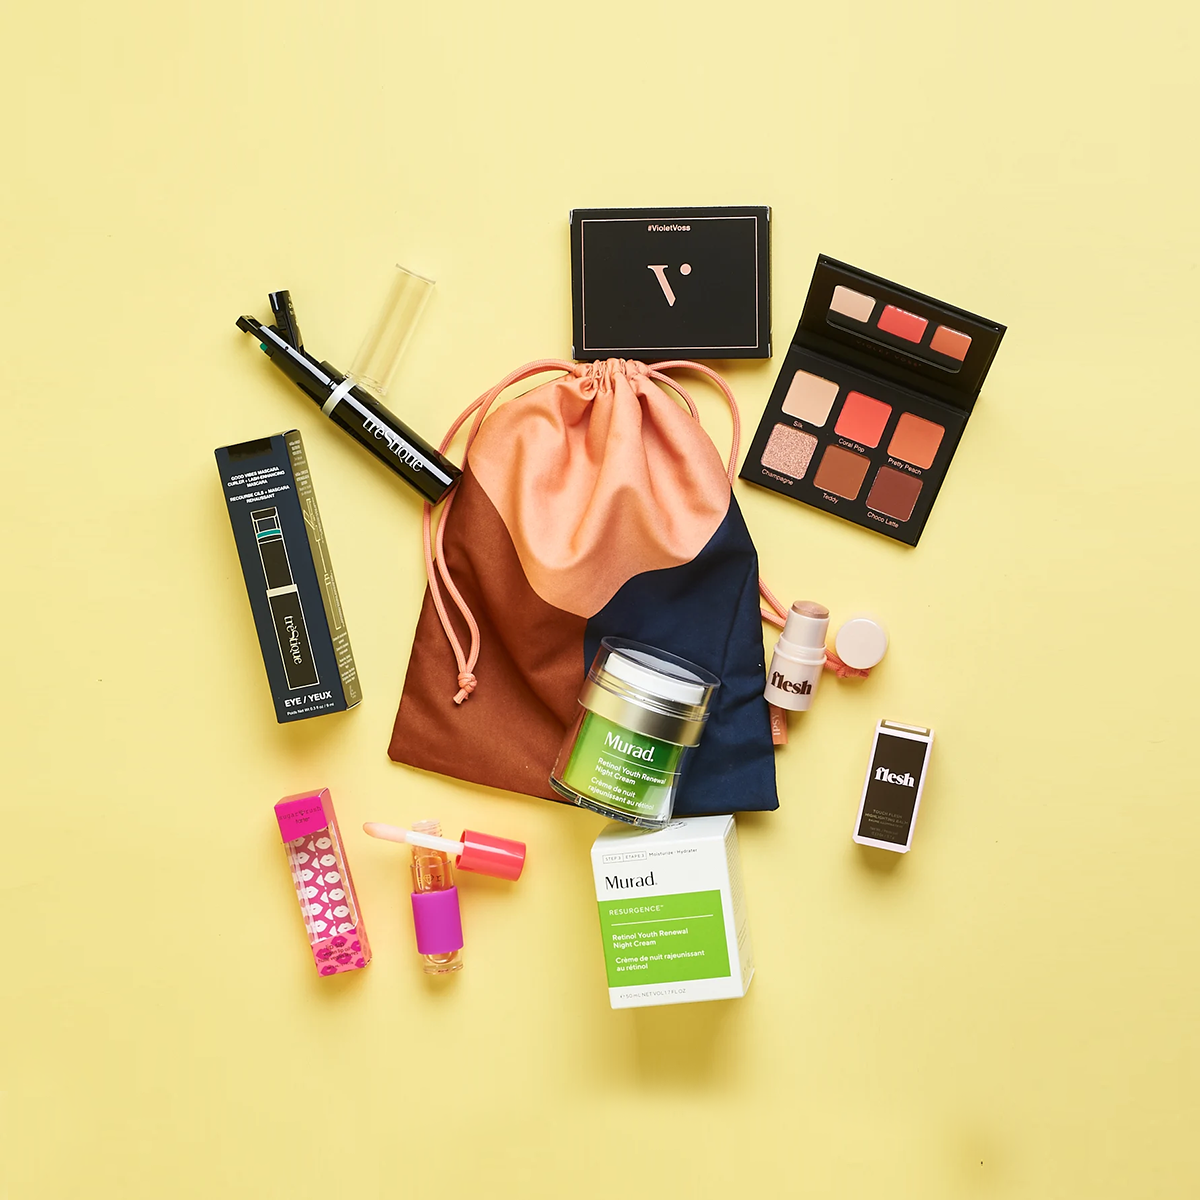 The 23 Best Beauty Subscription Boxes – 2021 Readers’ Choice Awards